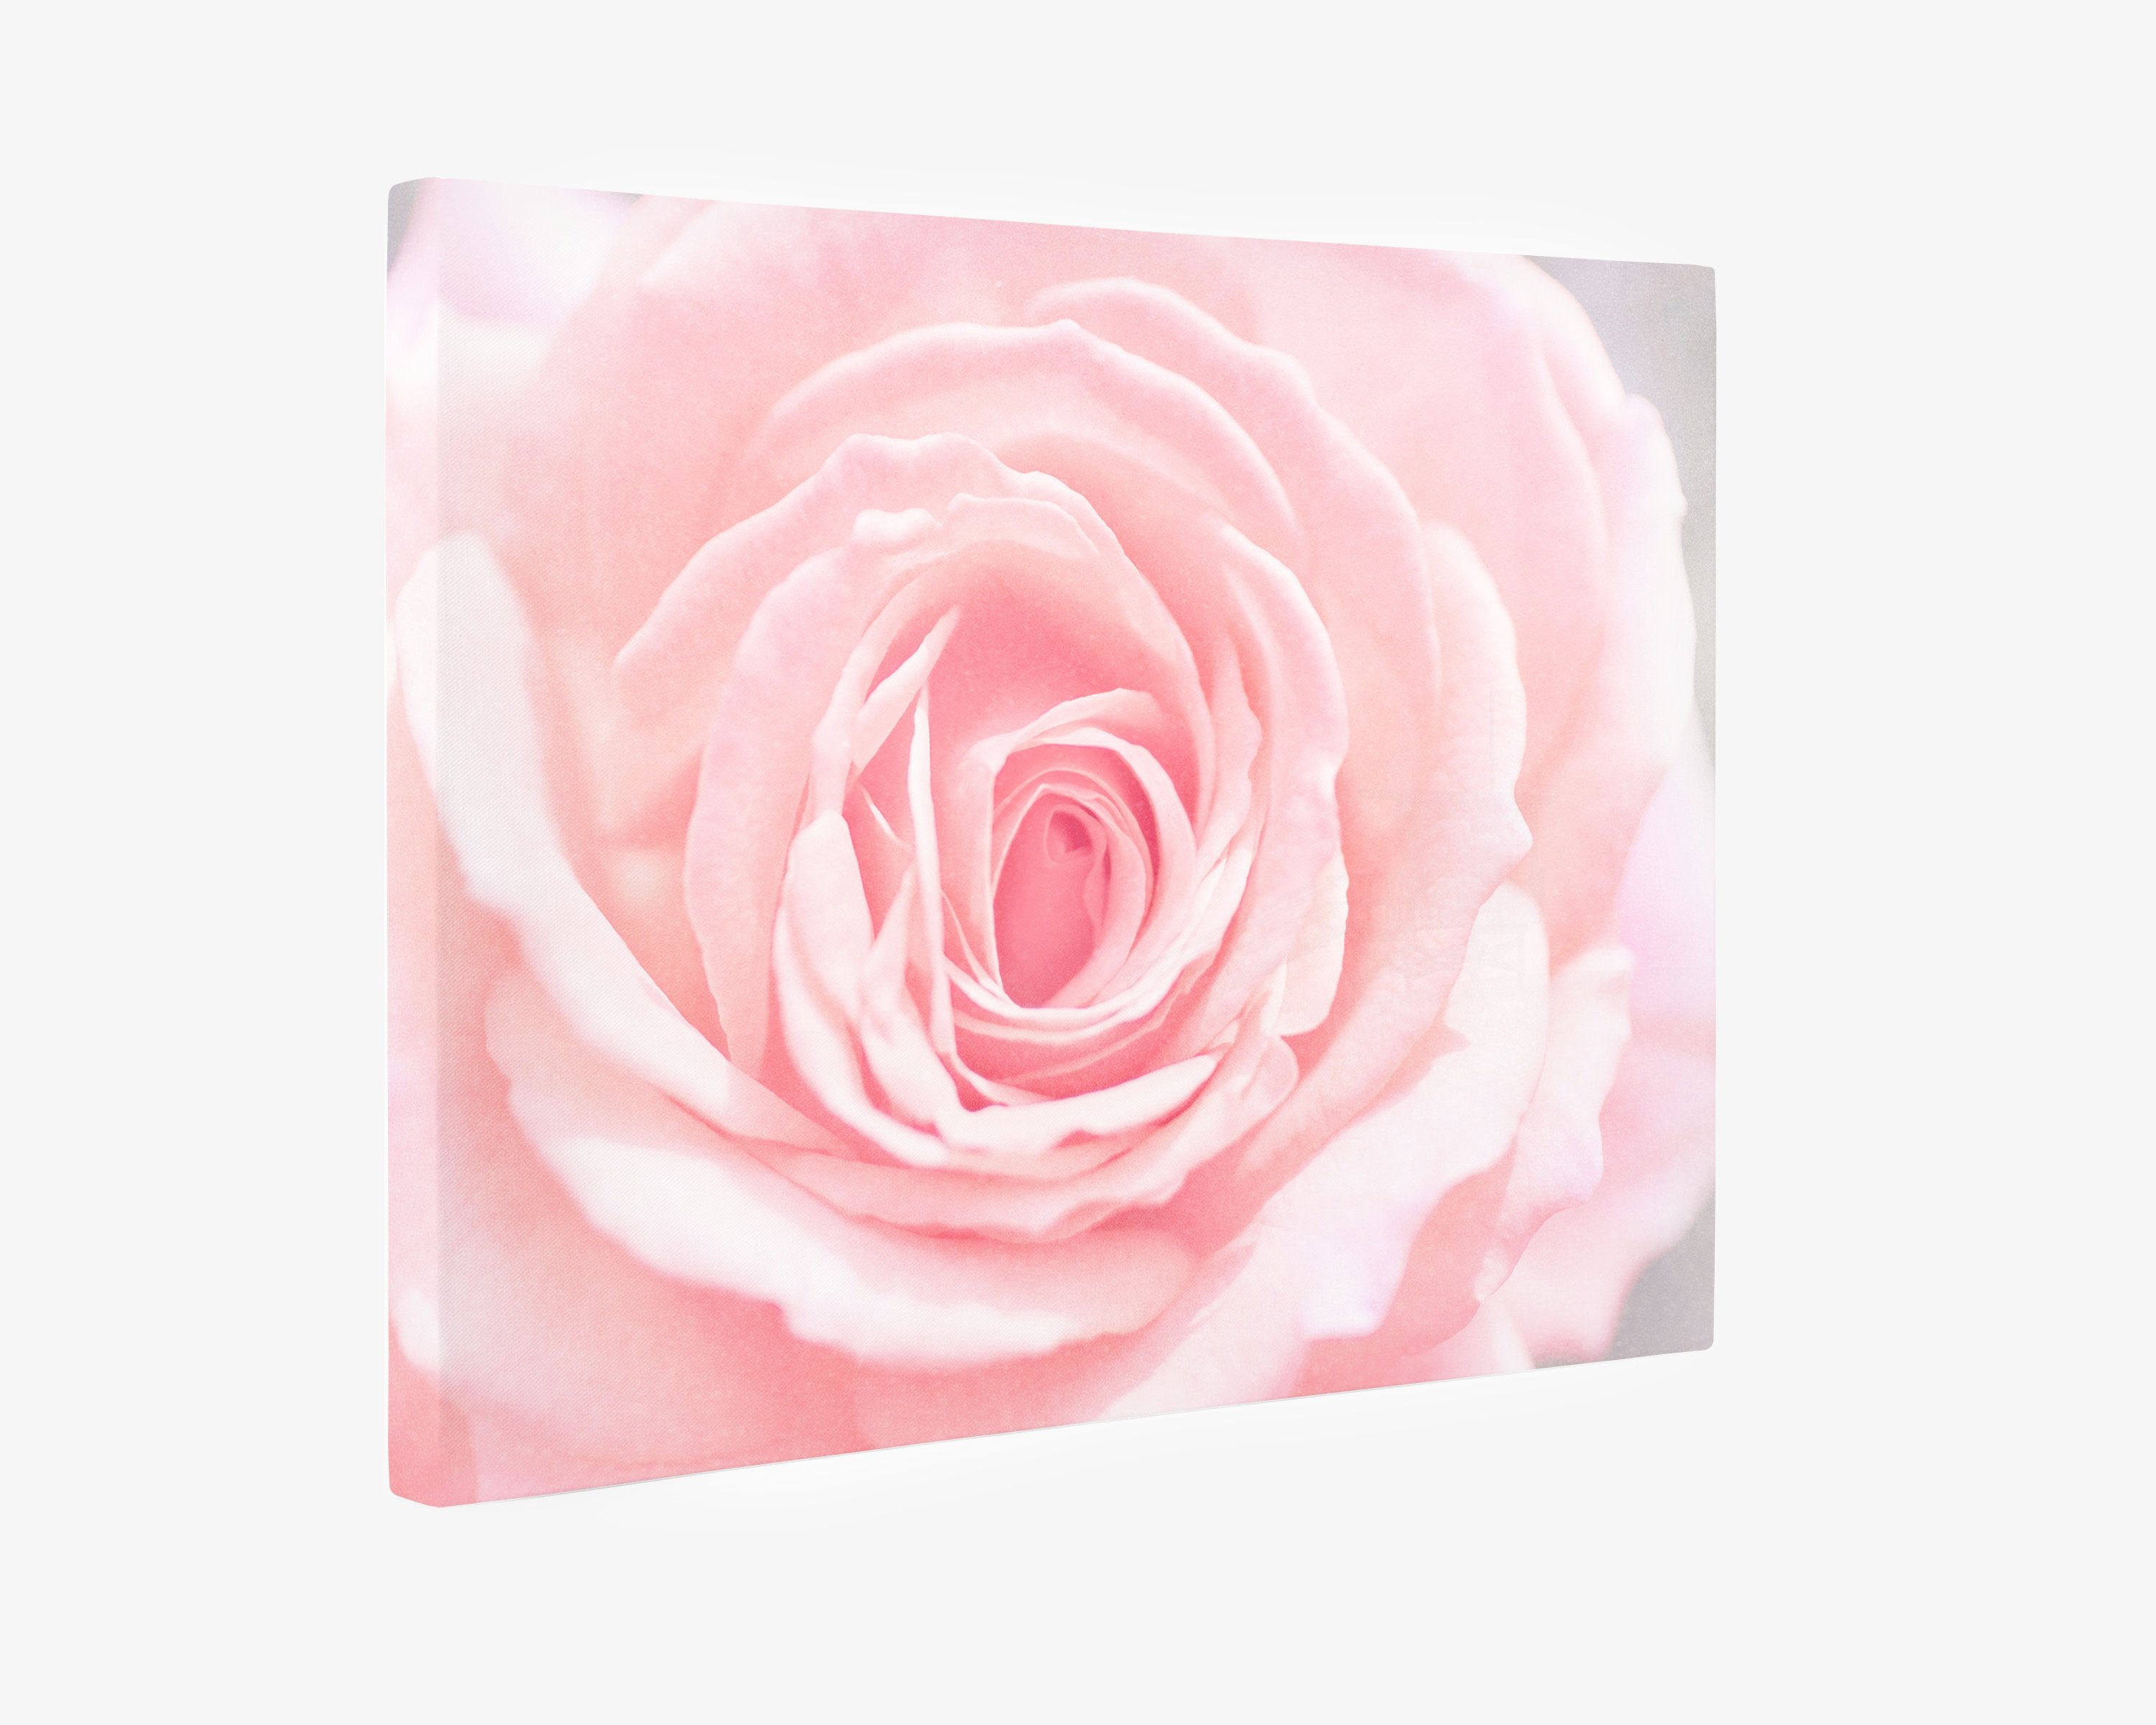 Canvas gallery wrap of pink rose showing the mirrored edge